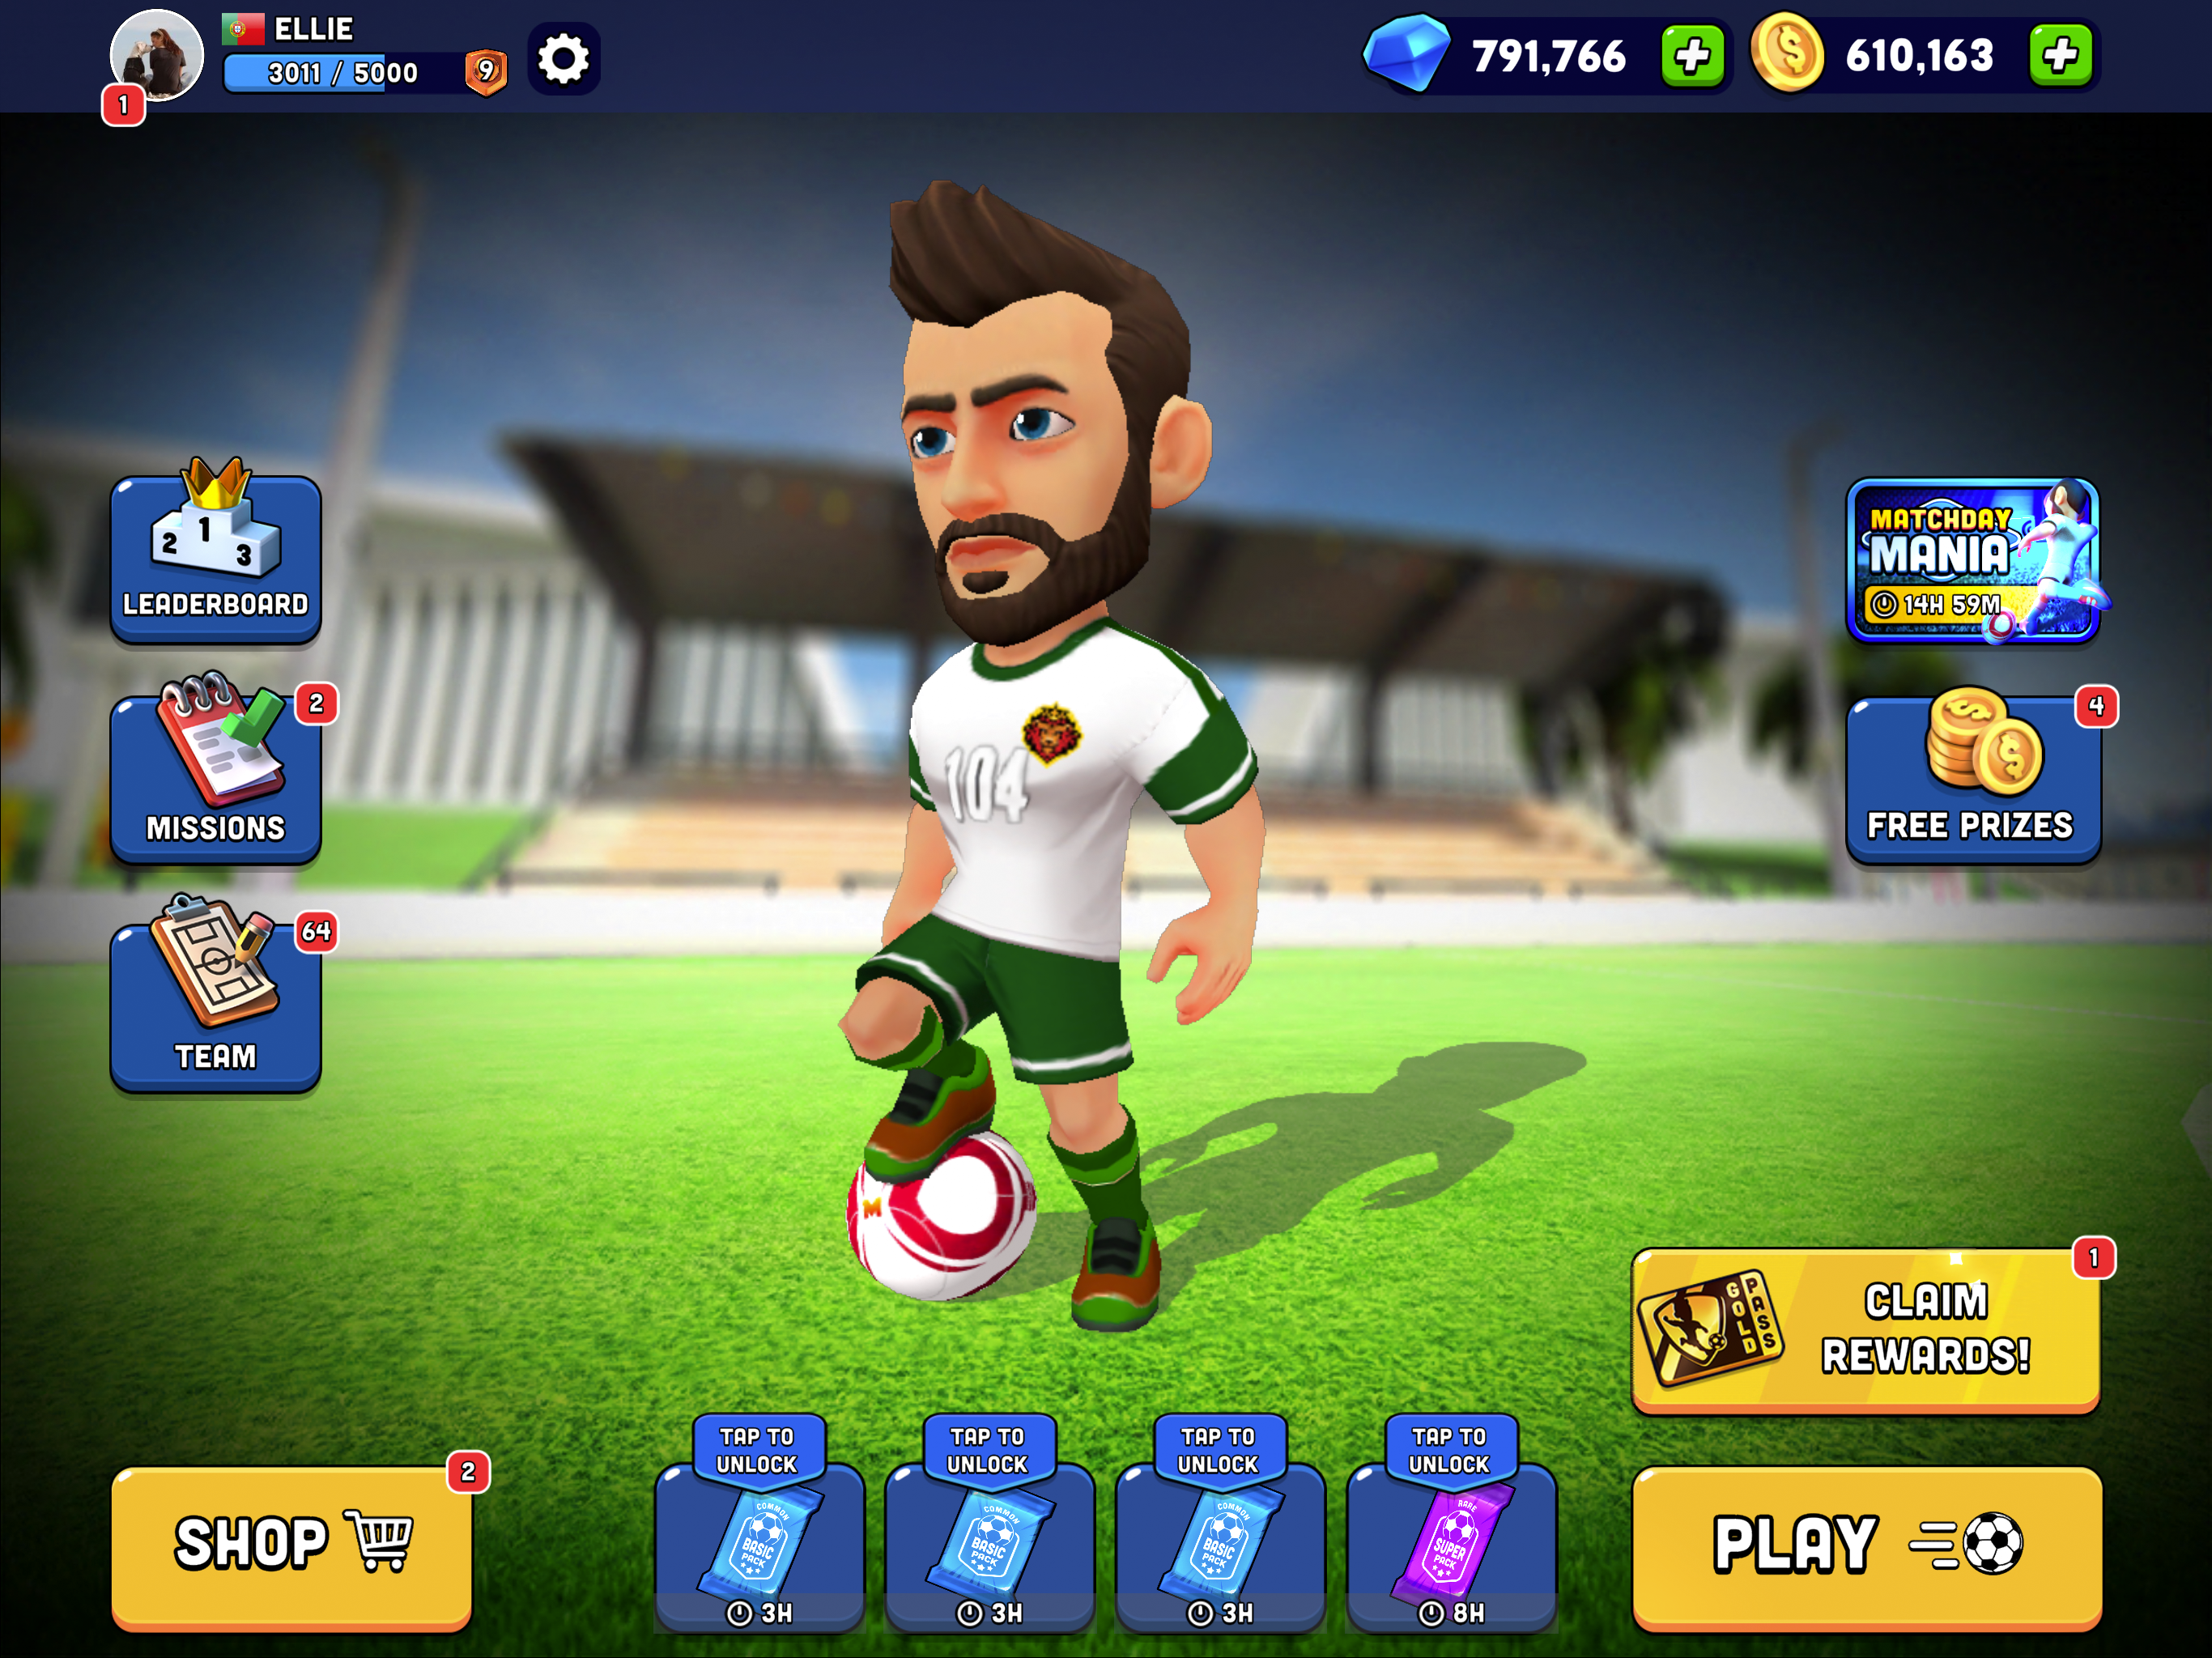 Mini Football Head Soccer Game Android Gameplay [HD] 